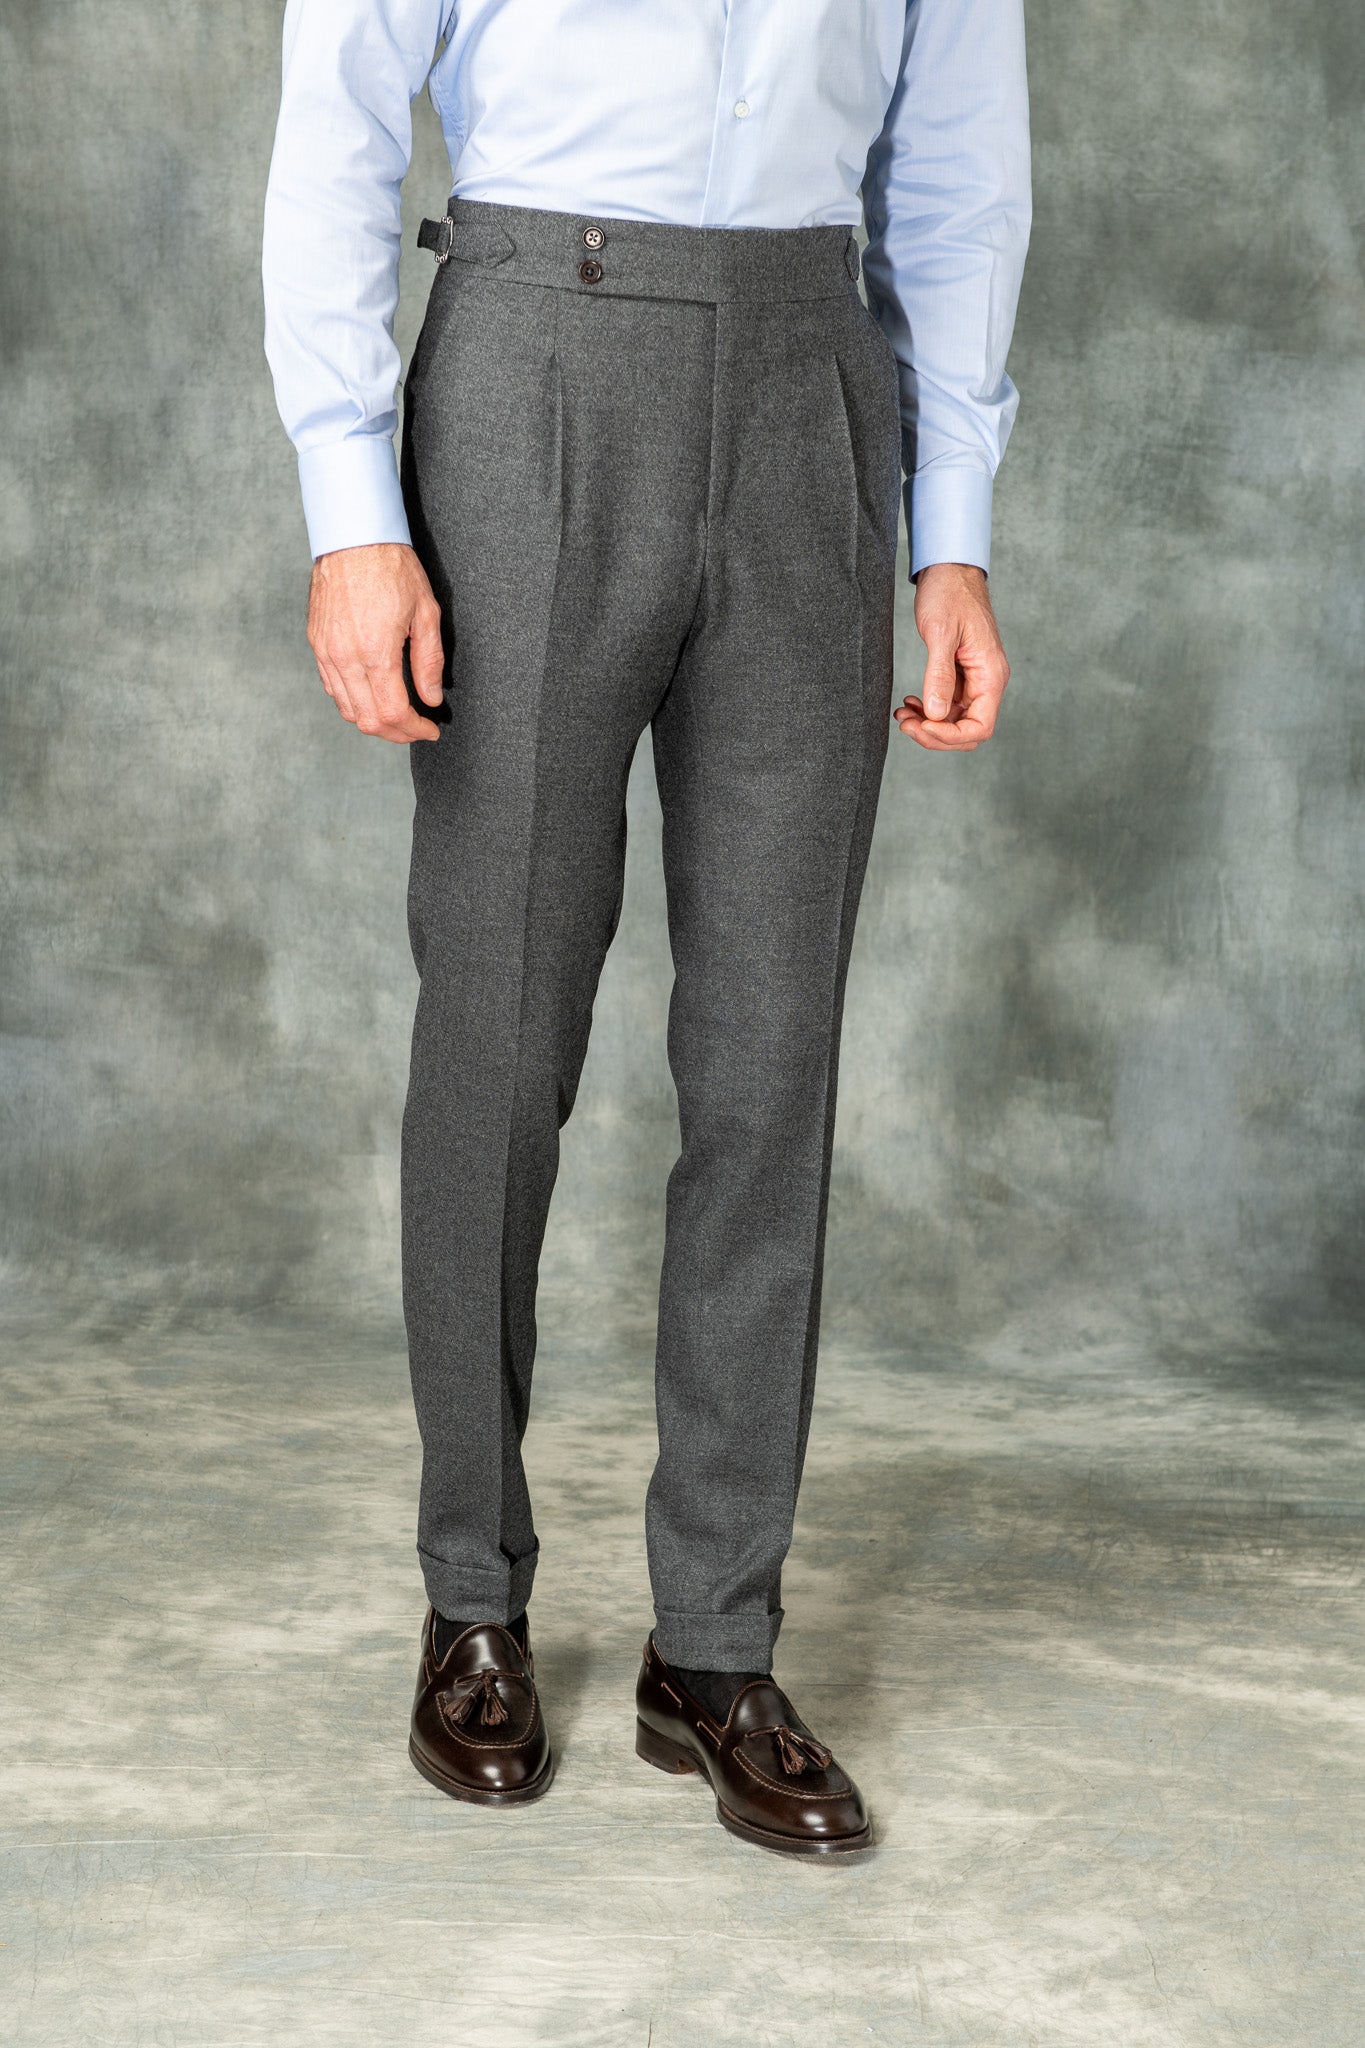 Angelico Gray flannel trousers Zignone fabric Confort trousers for Man  made of wool medium grey